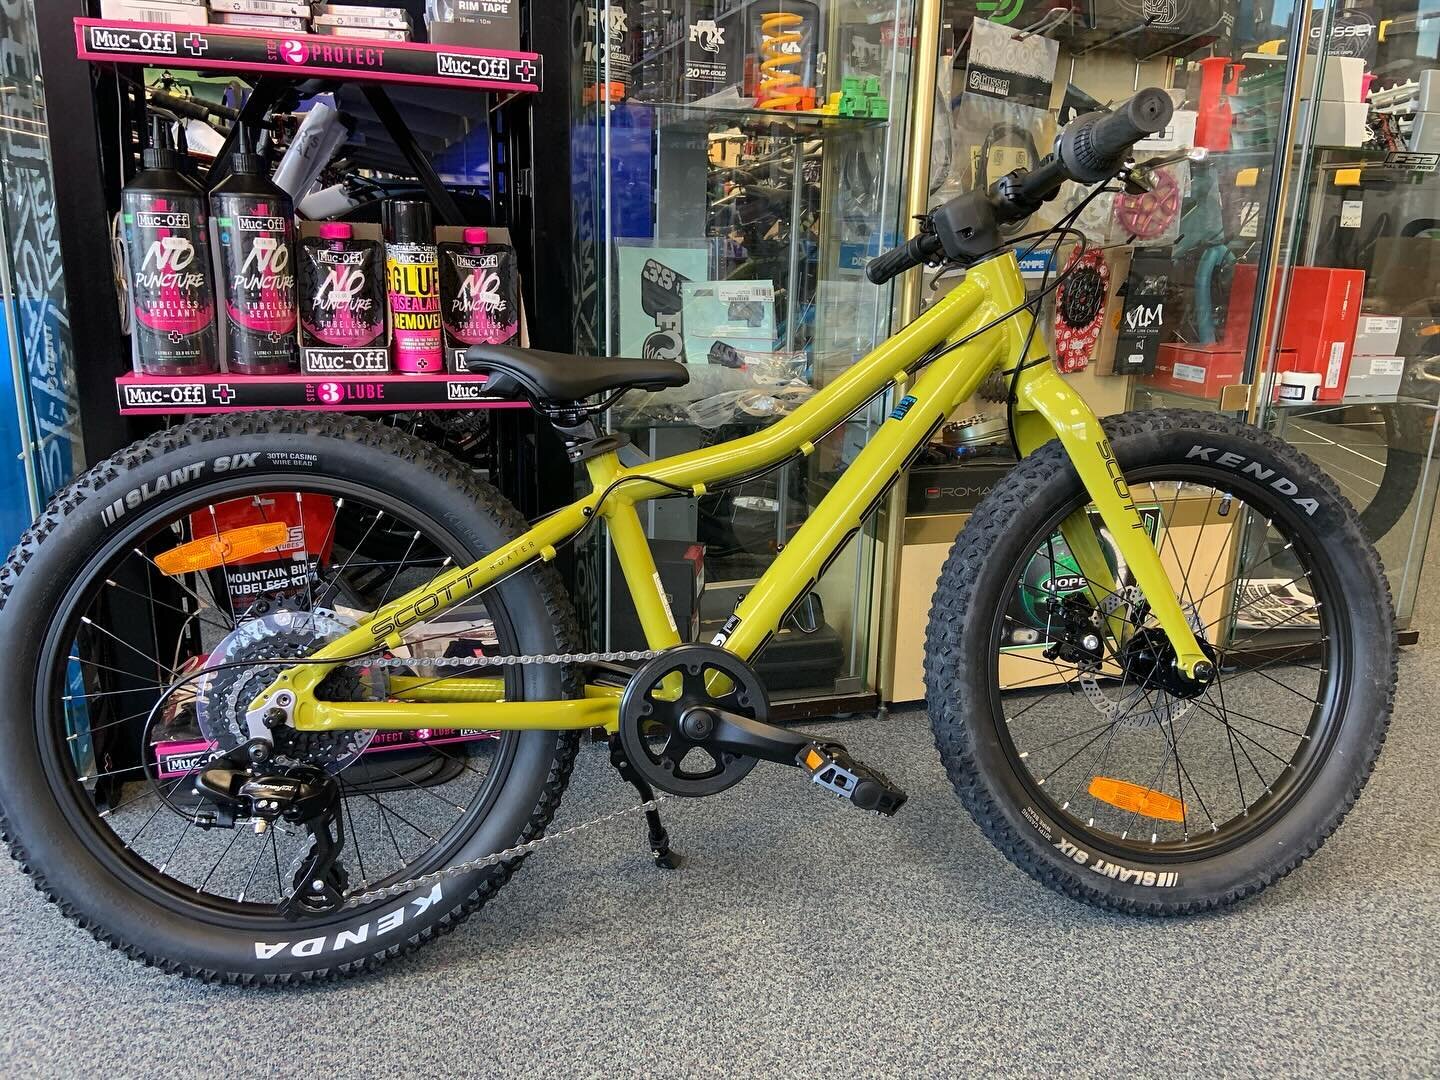 Another of the wonderful @bikeonscott Junior bikes leaving us yesterday. These bikes have been very popular of late due to the great build quality, weight and value. #localbikeshop #kidsbikes #juniorrider #shoplocal #localbusiness #miltonkeynes #milt